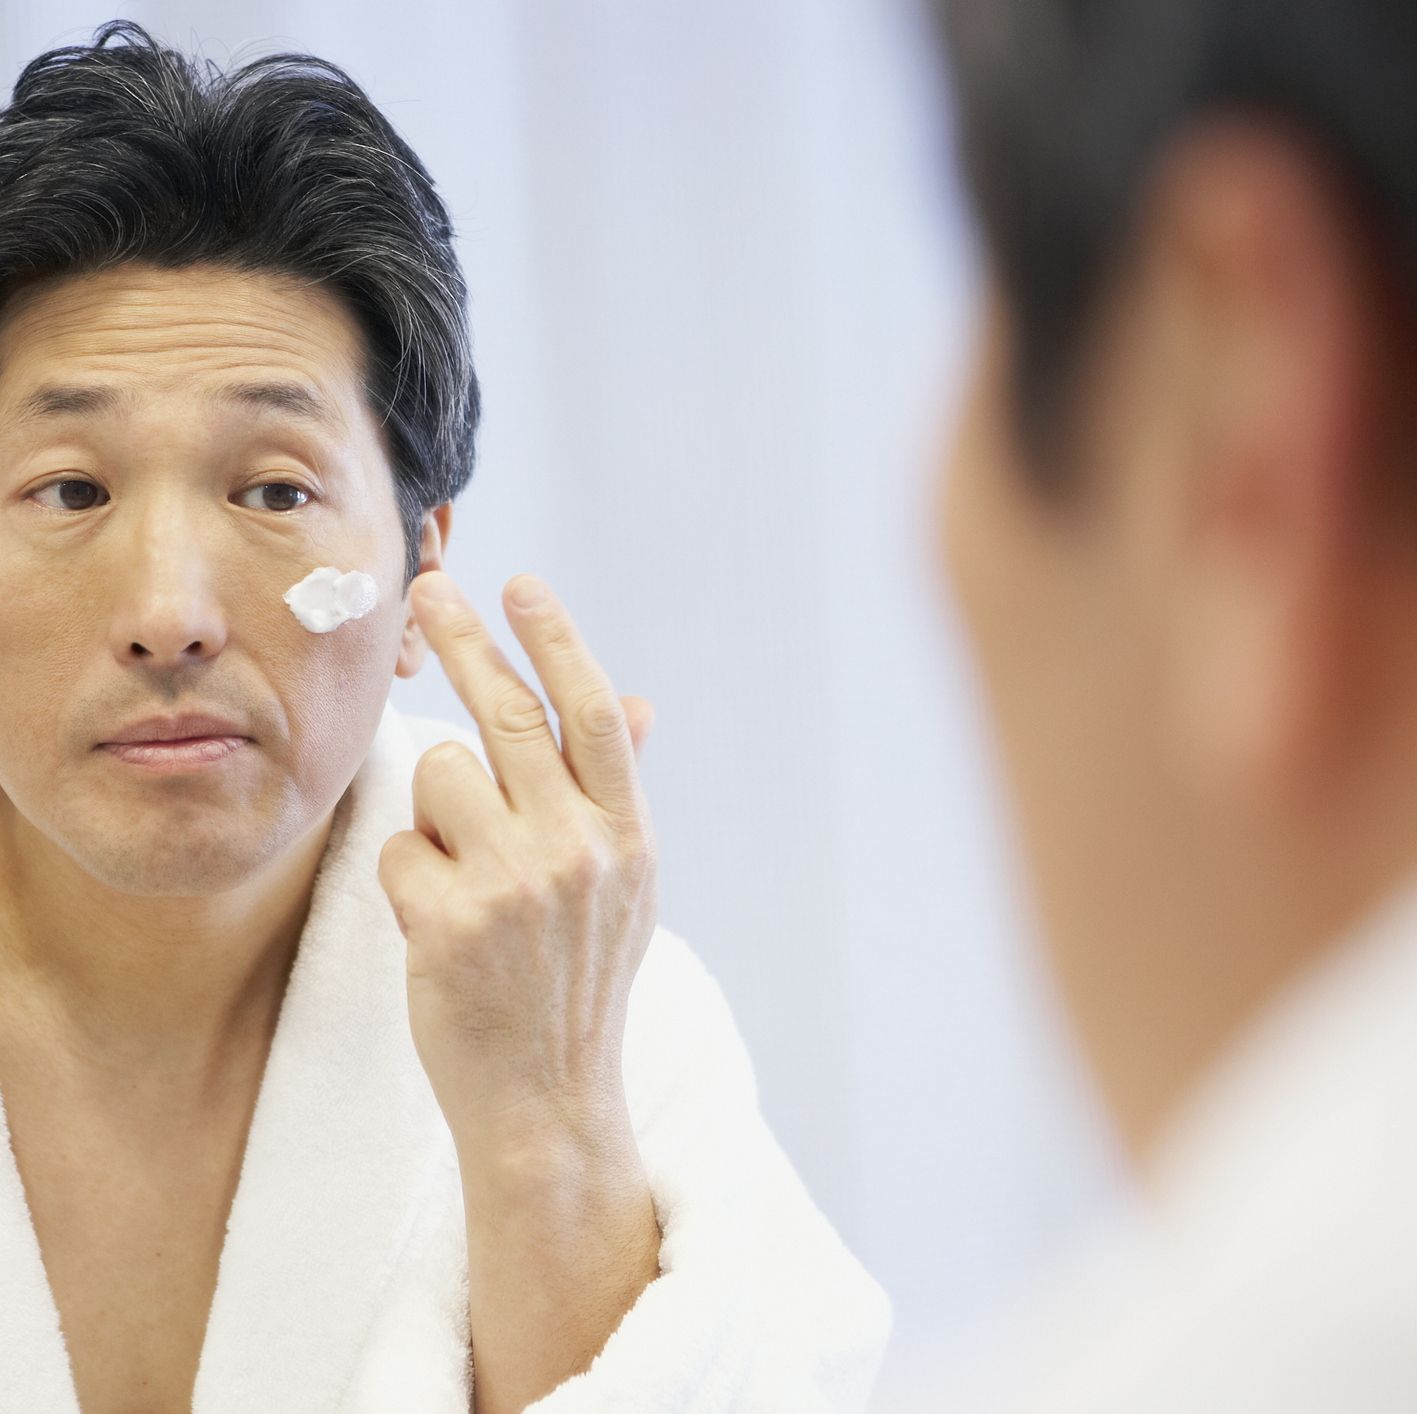 Grooming Secrets to Look Great at Any Age